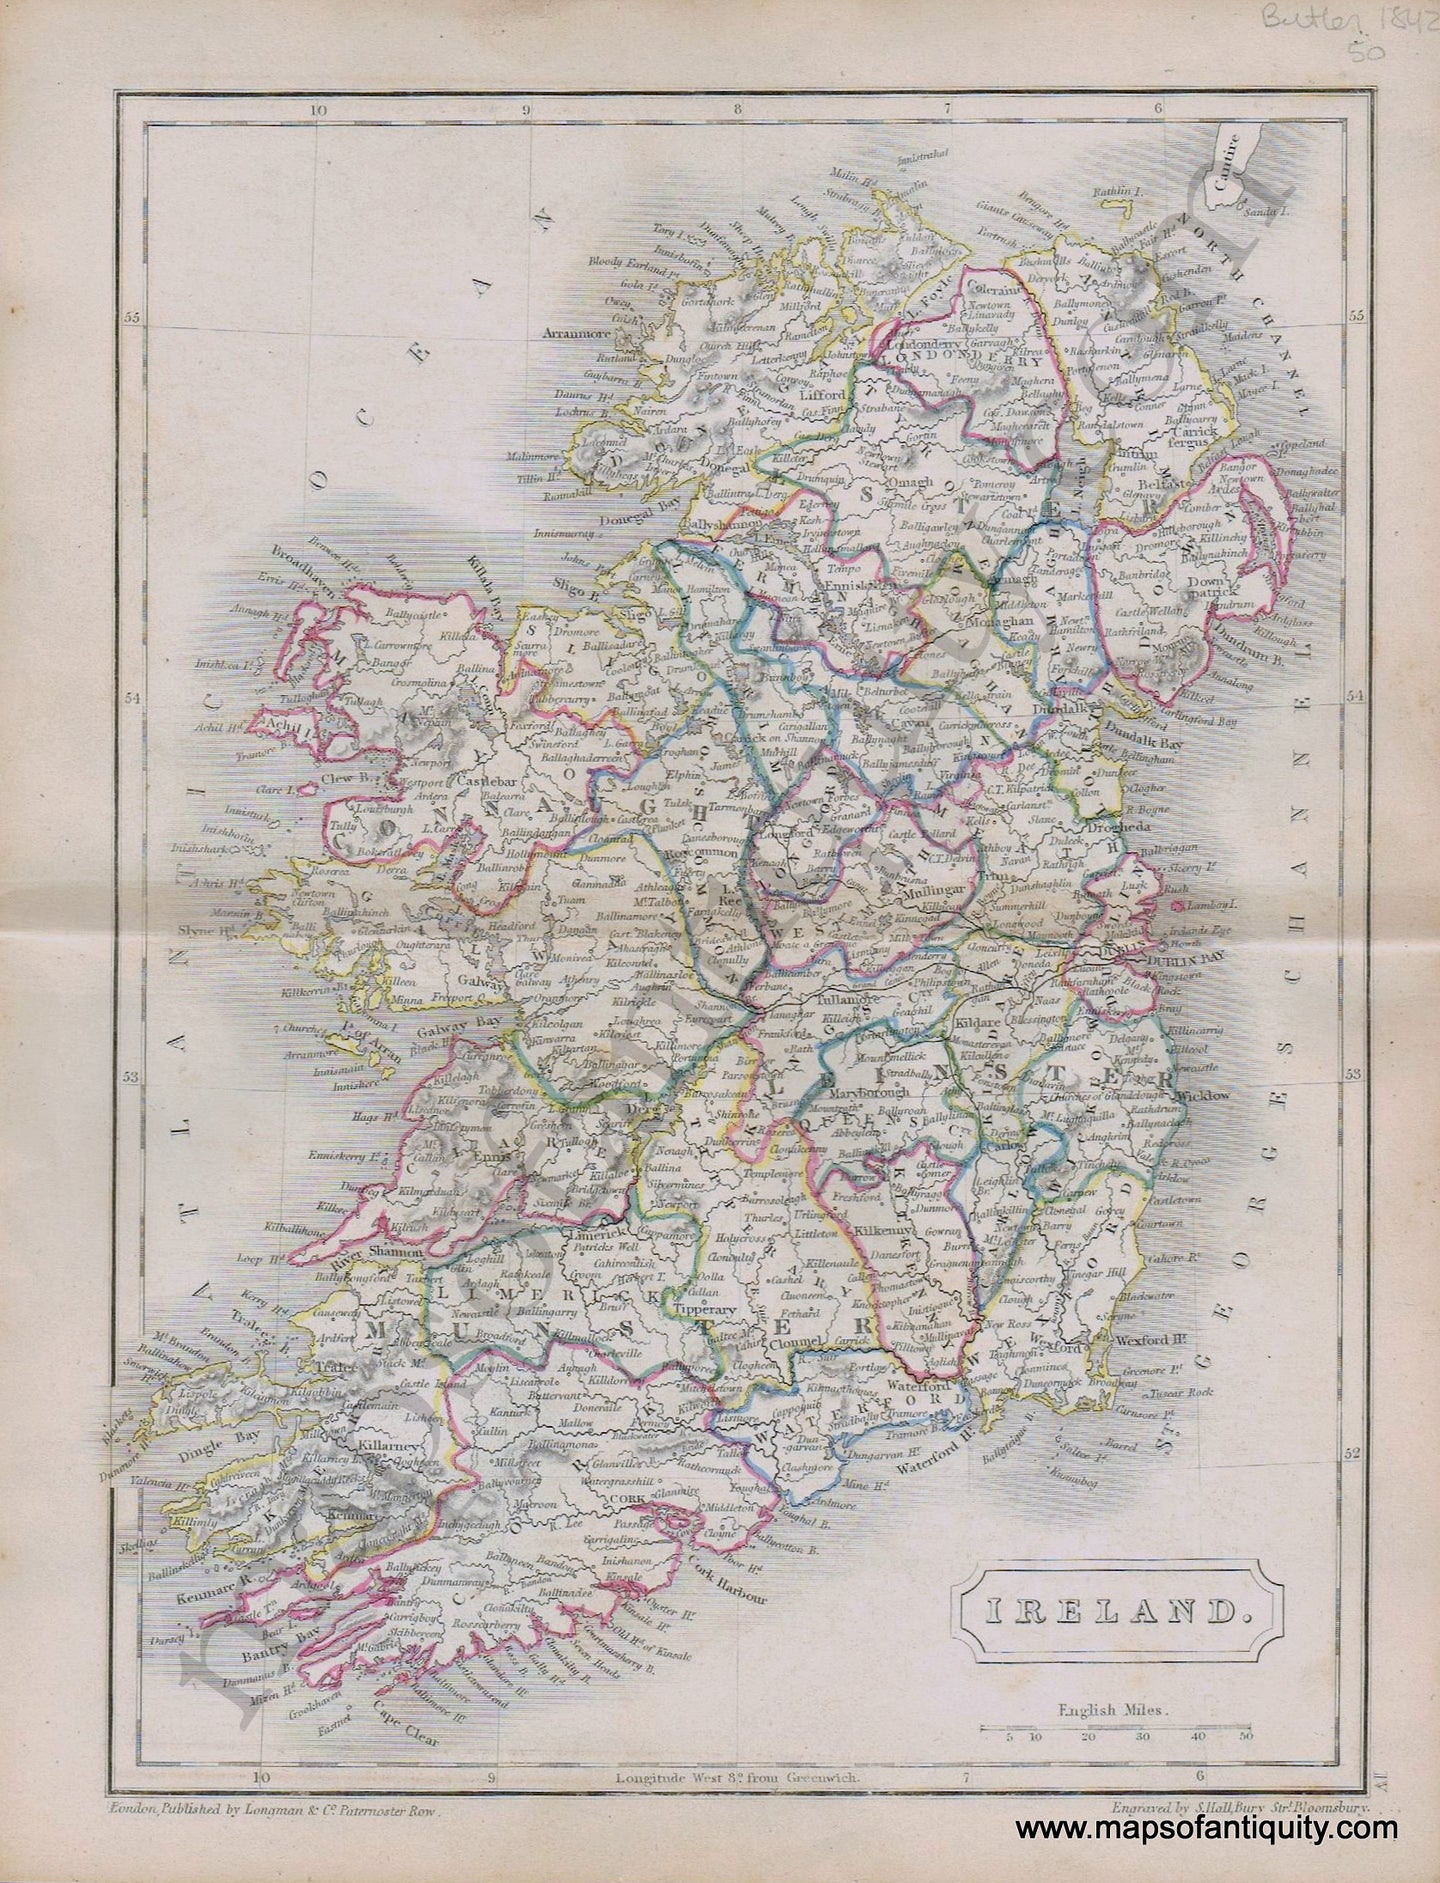 Antique-Hand-Colored-Map-Ireland.-1842-Butler-Ireland-1800s-19th-century-Maps-of-Antiquity